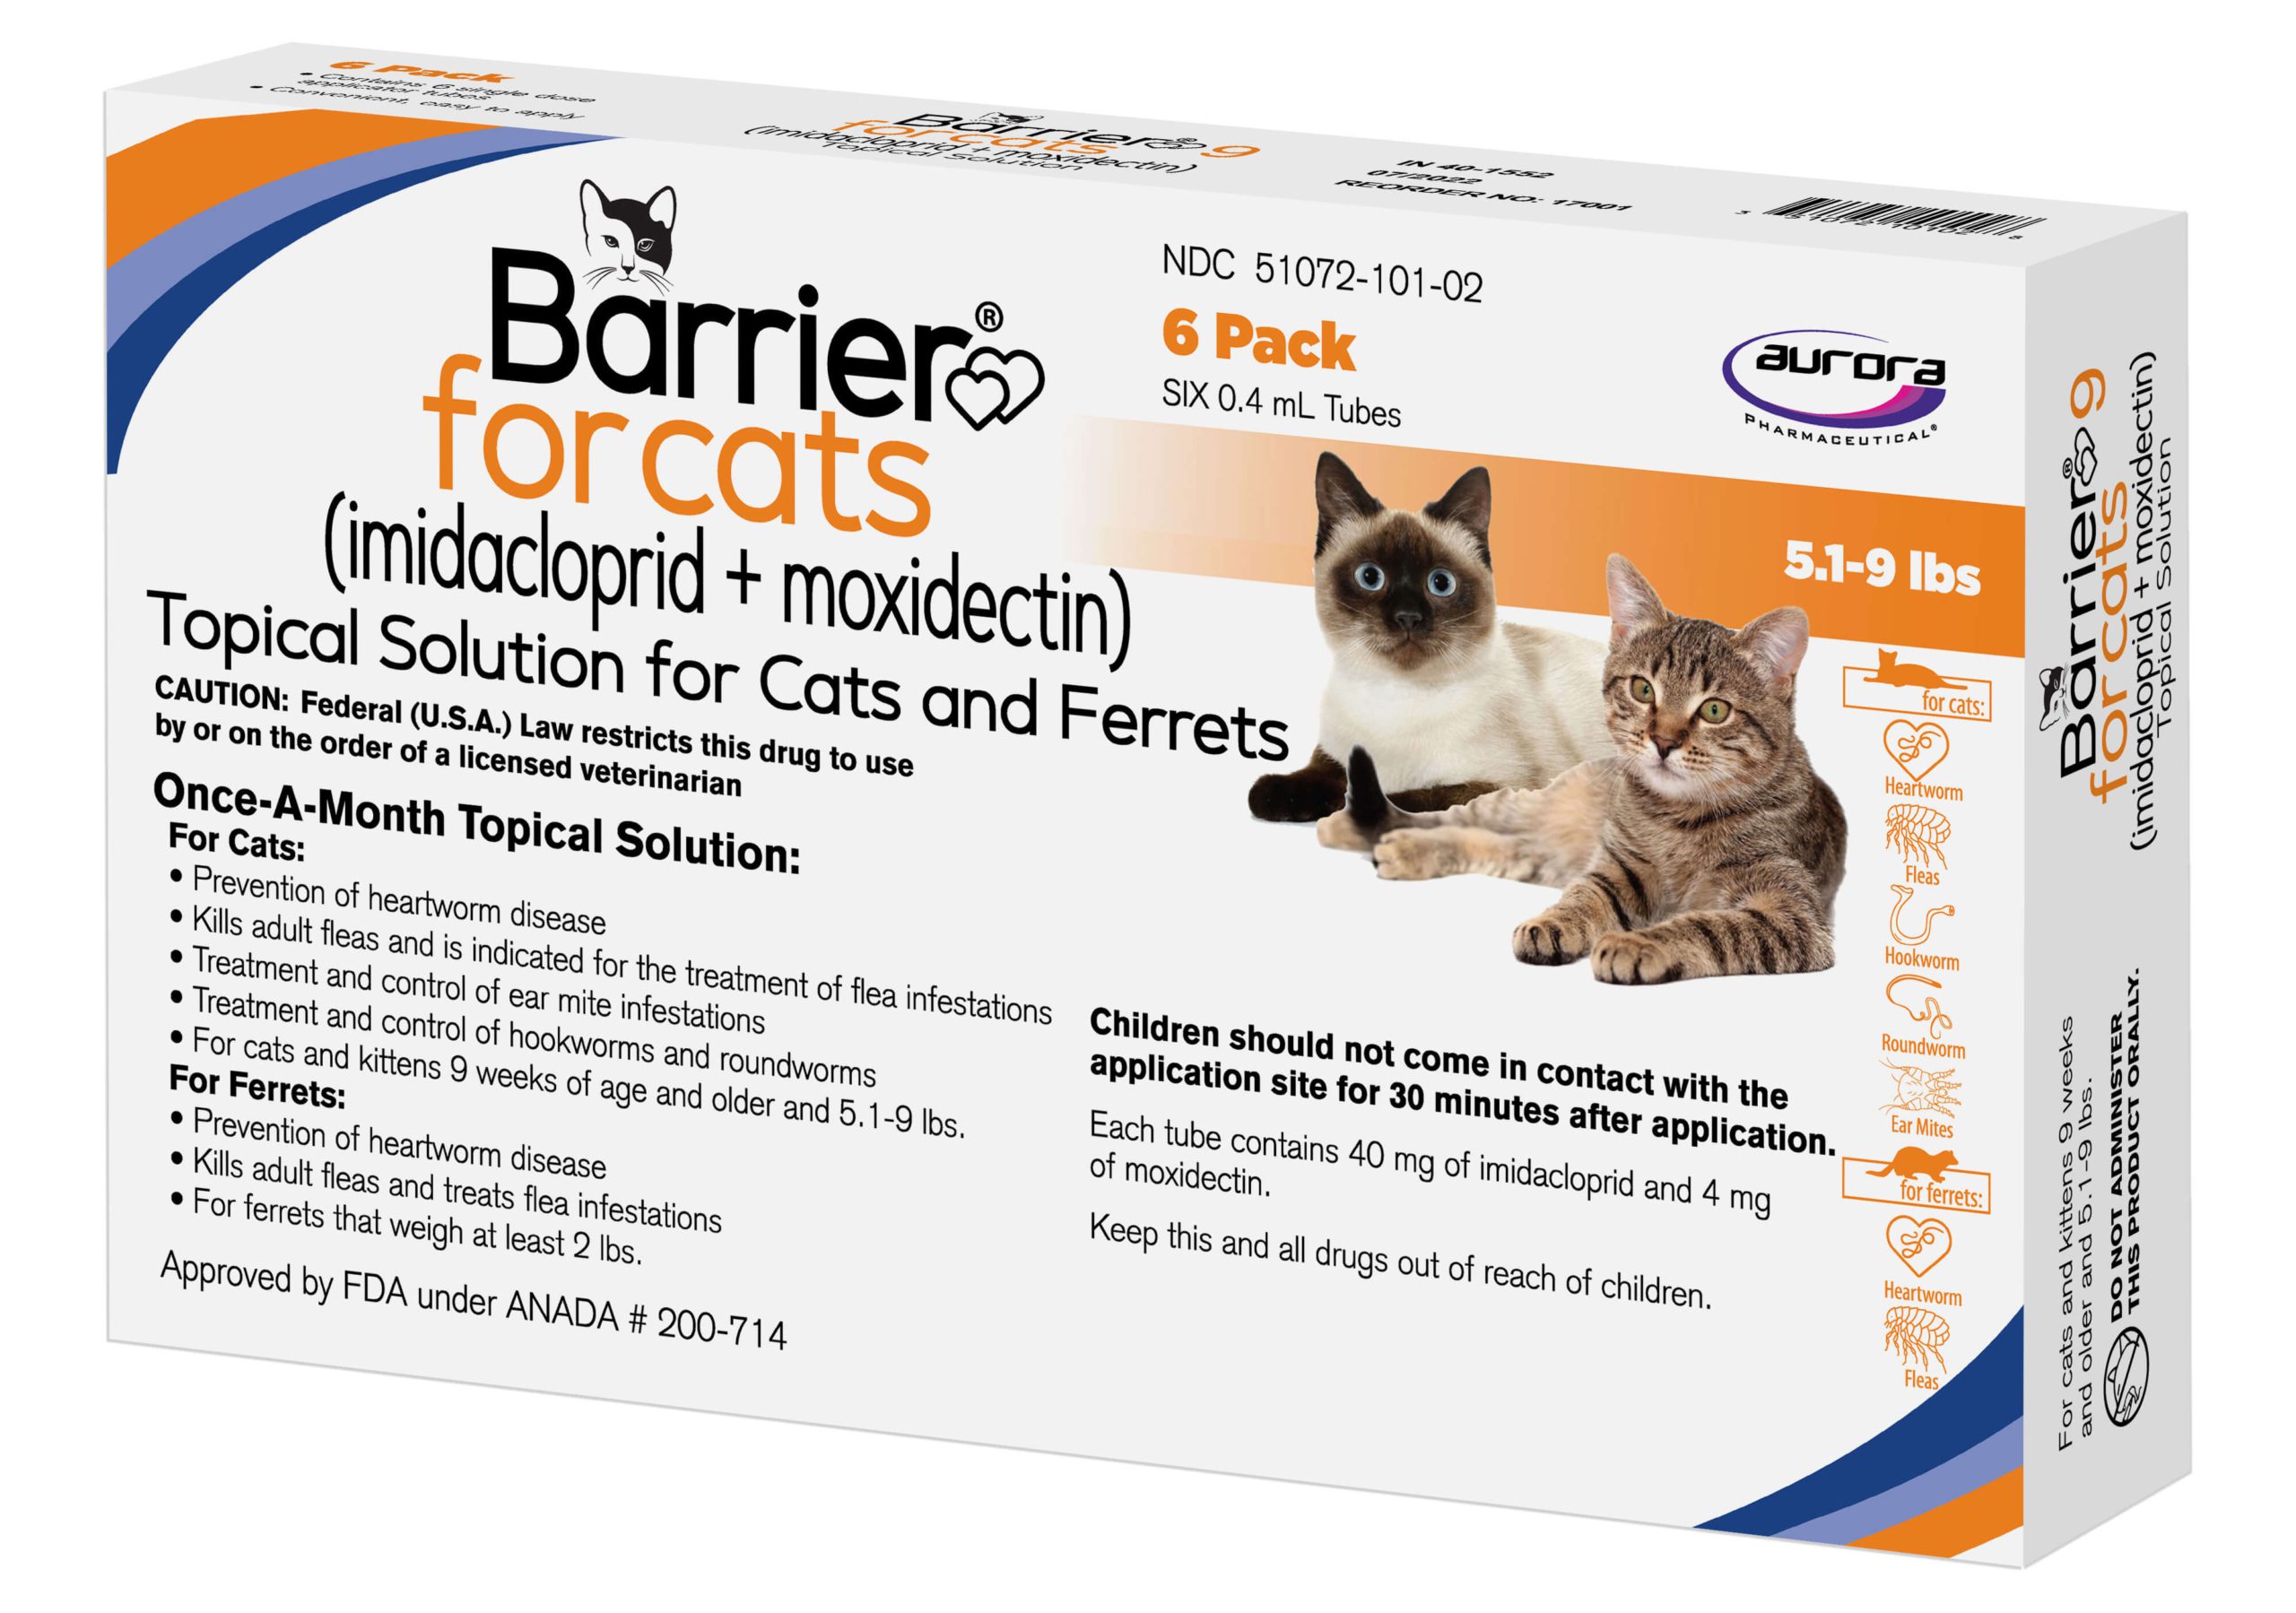 barrier-for-cats-5.1-9-lbs-scaled.jpg